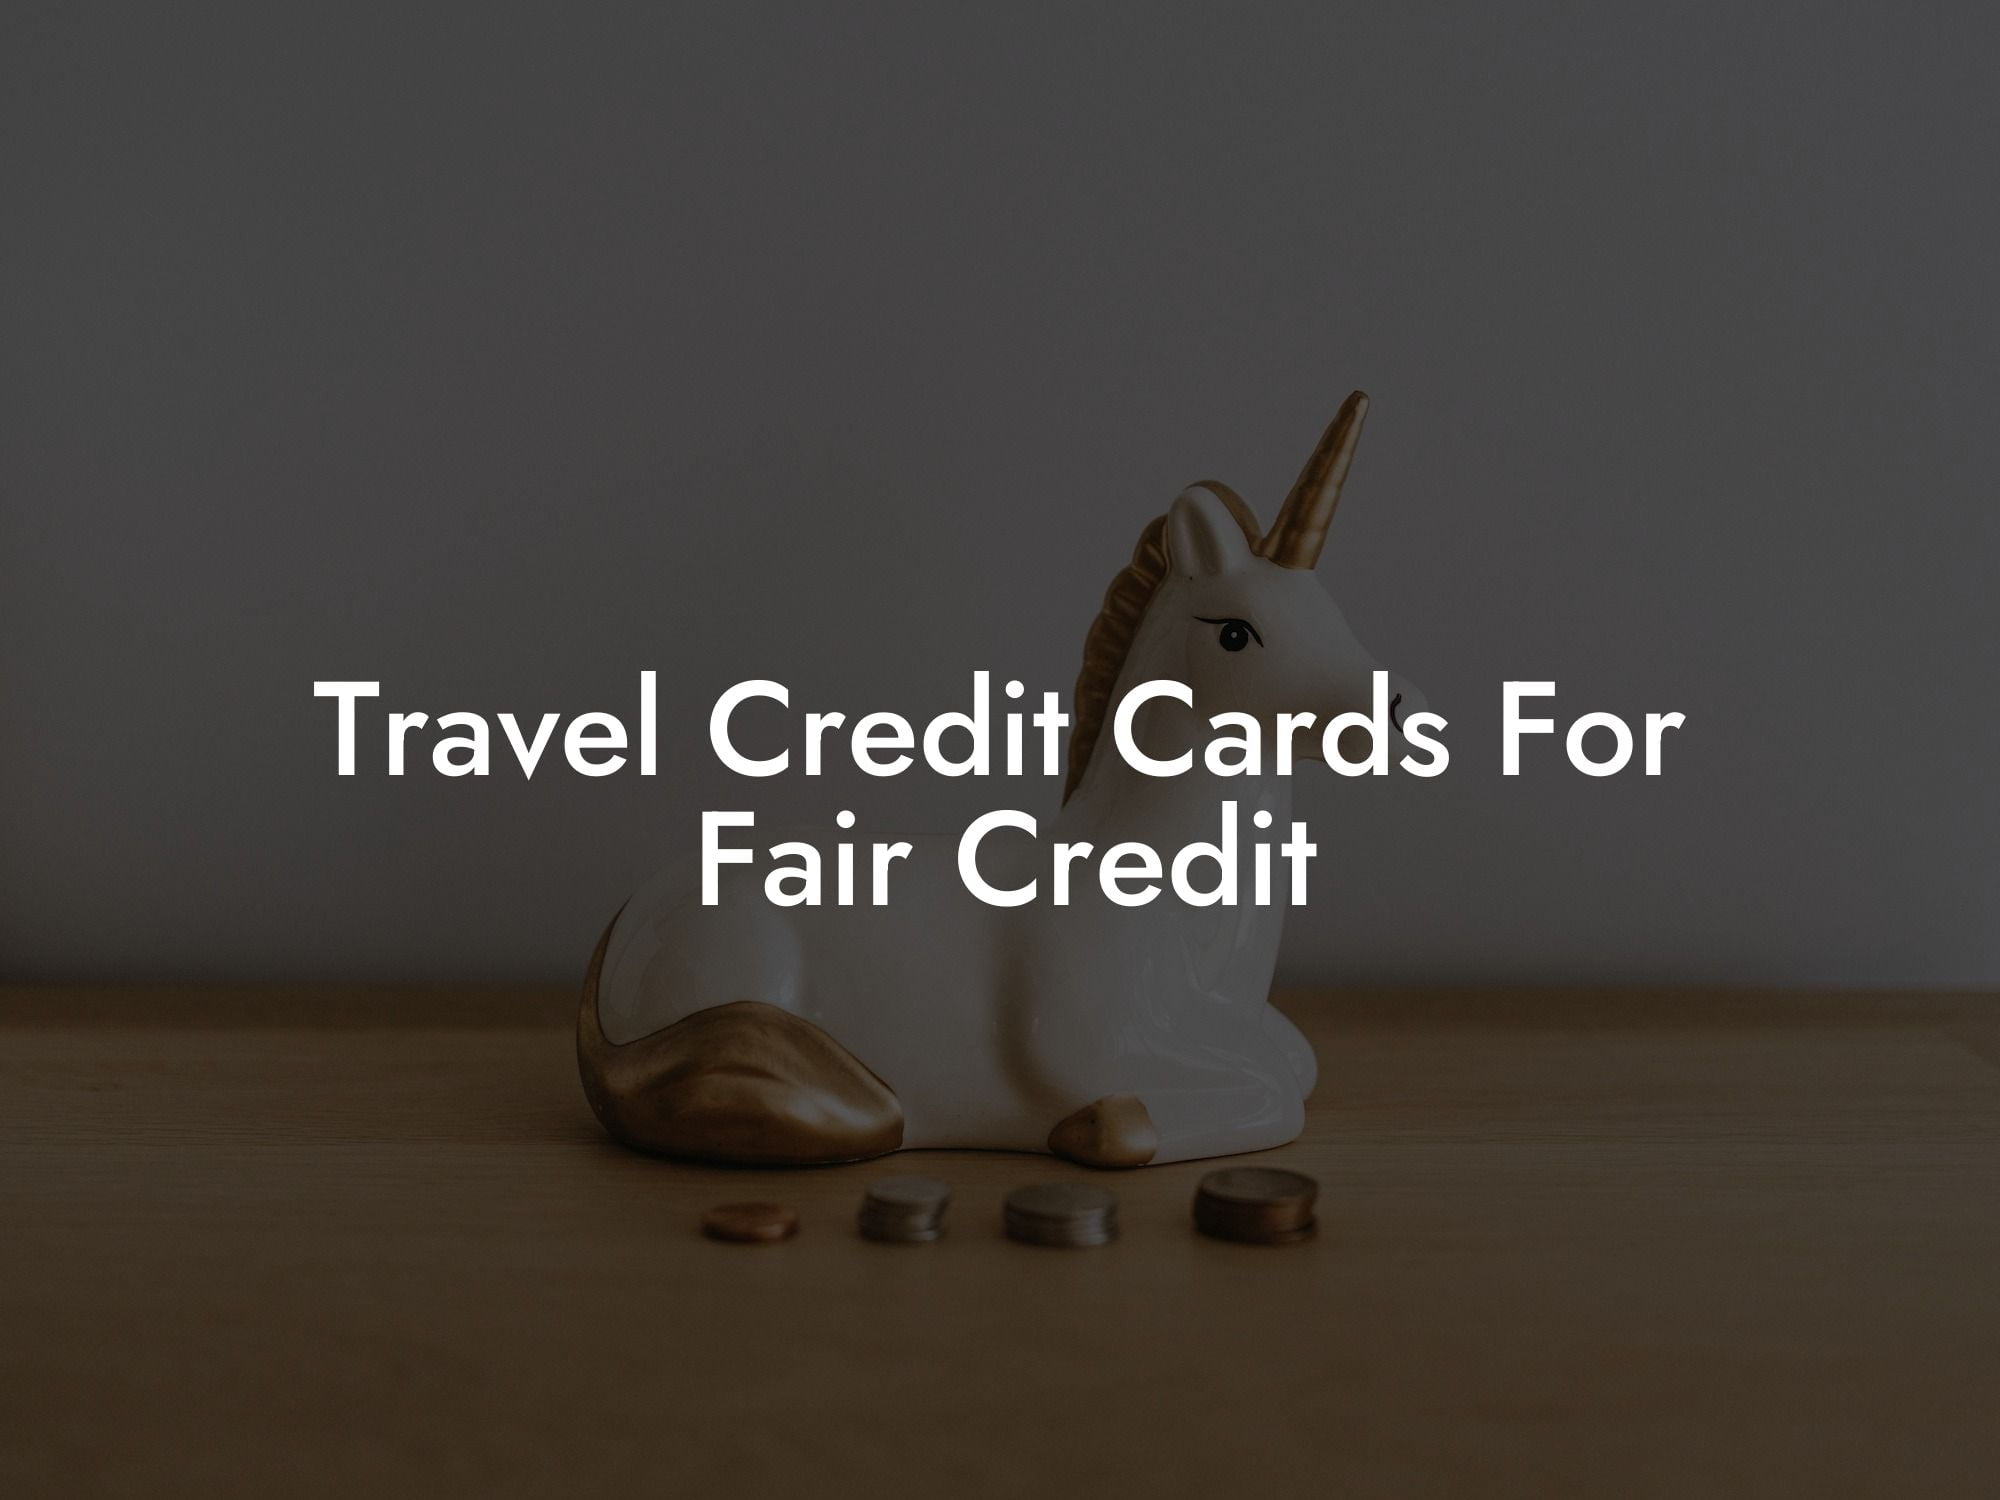 Travel Credit Cards For Fair Credit